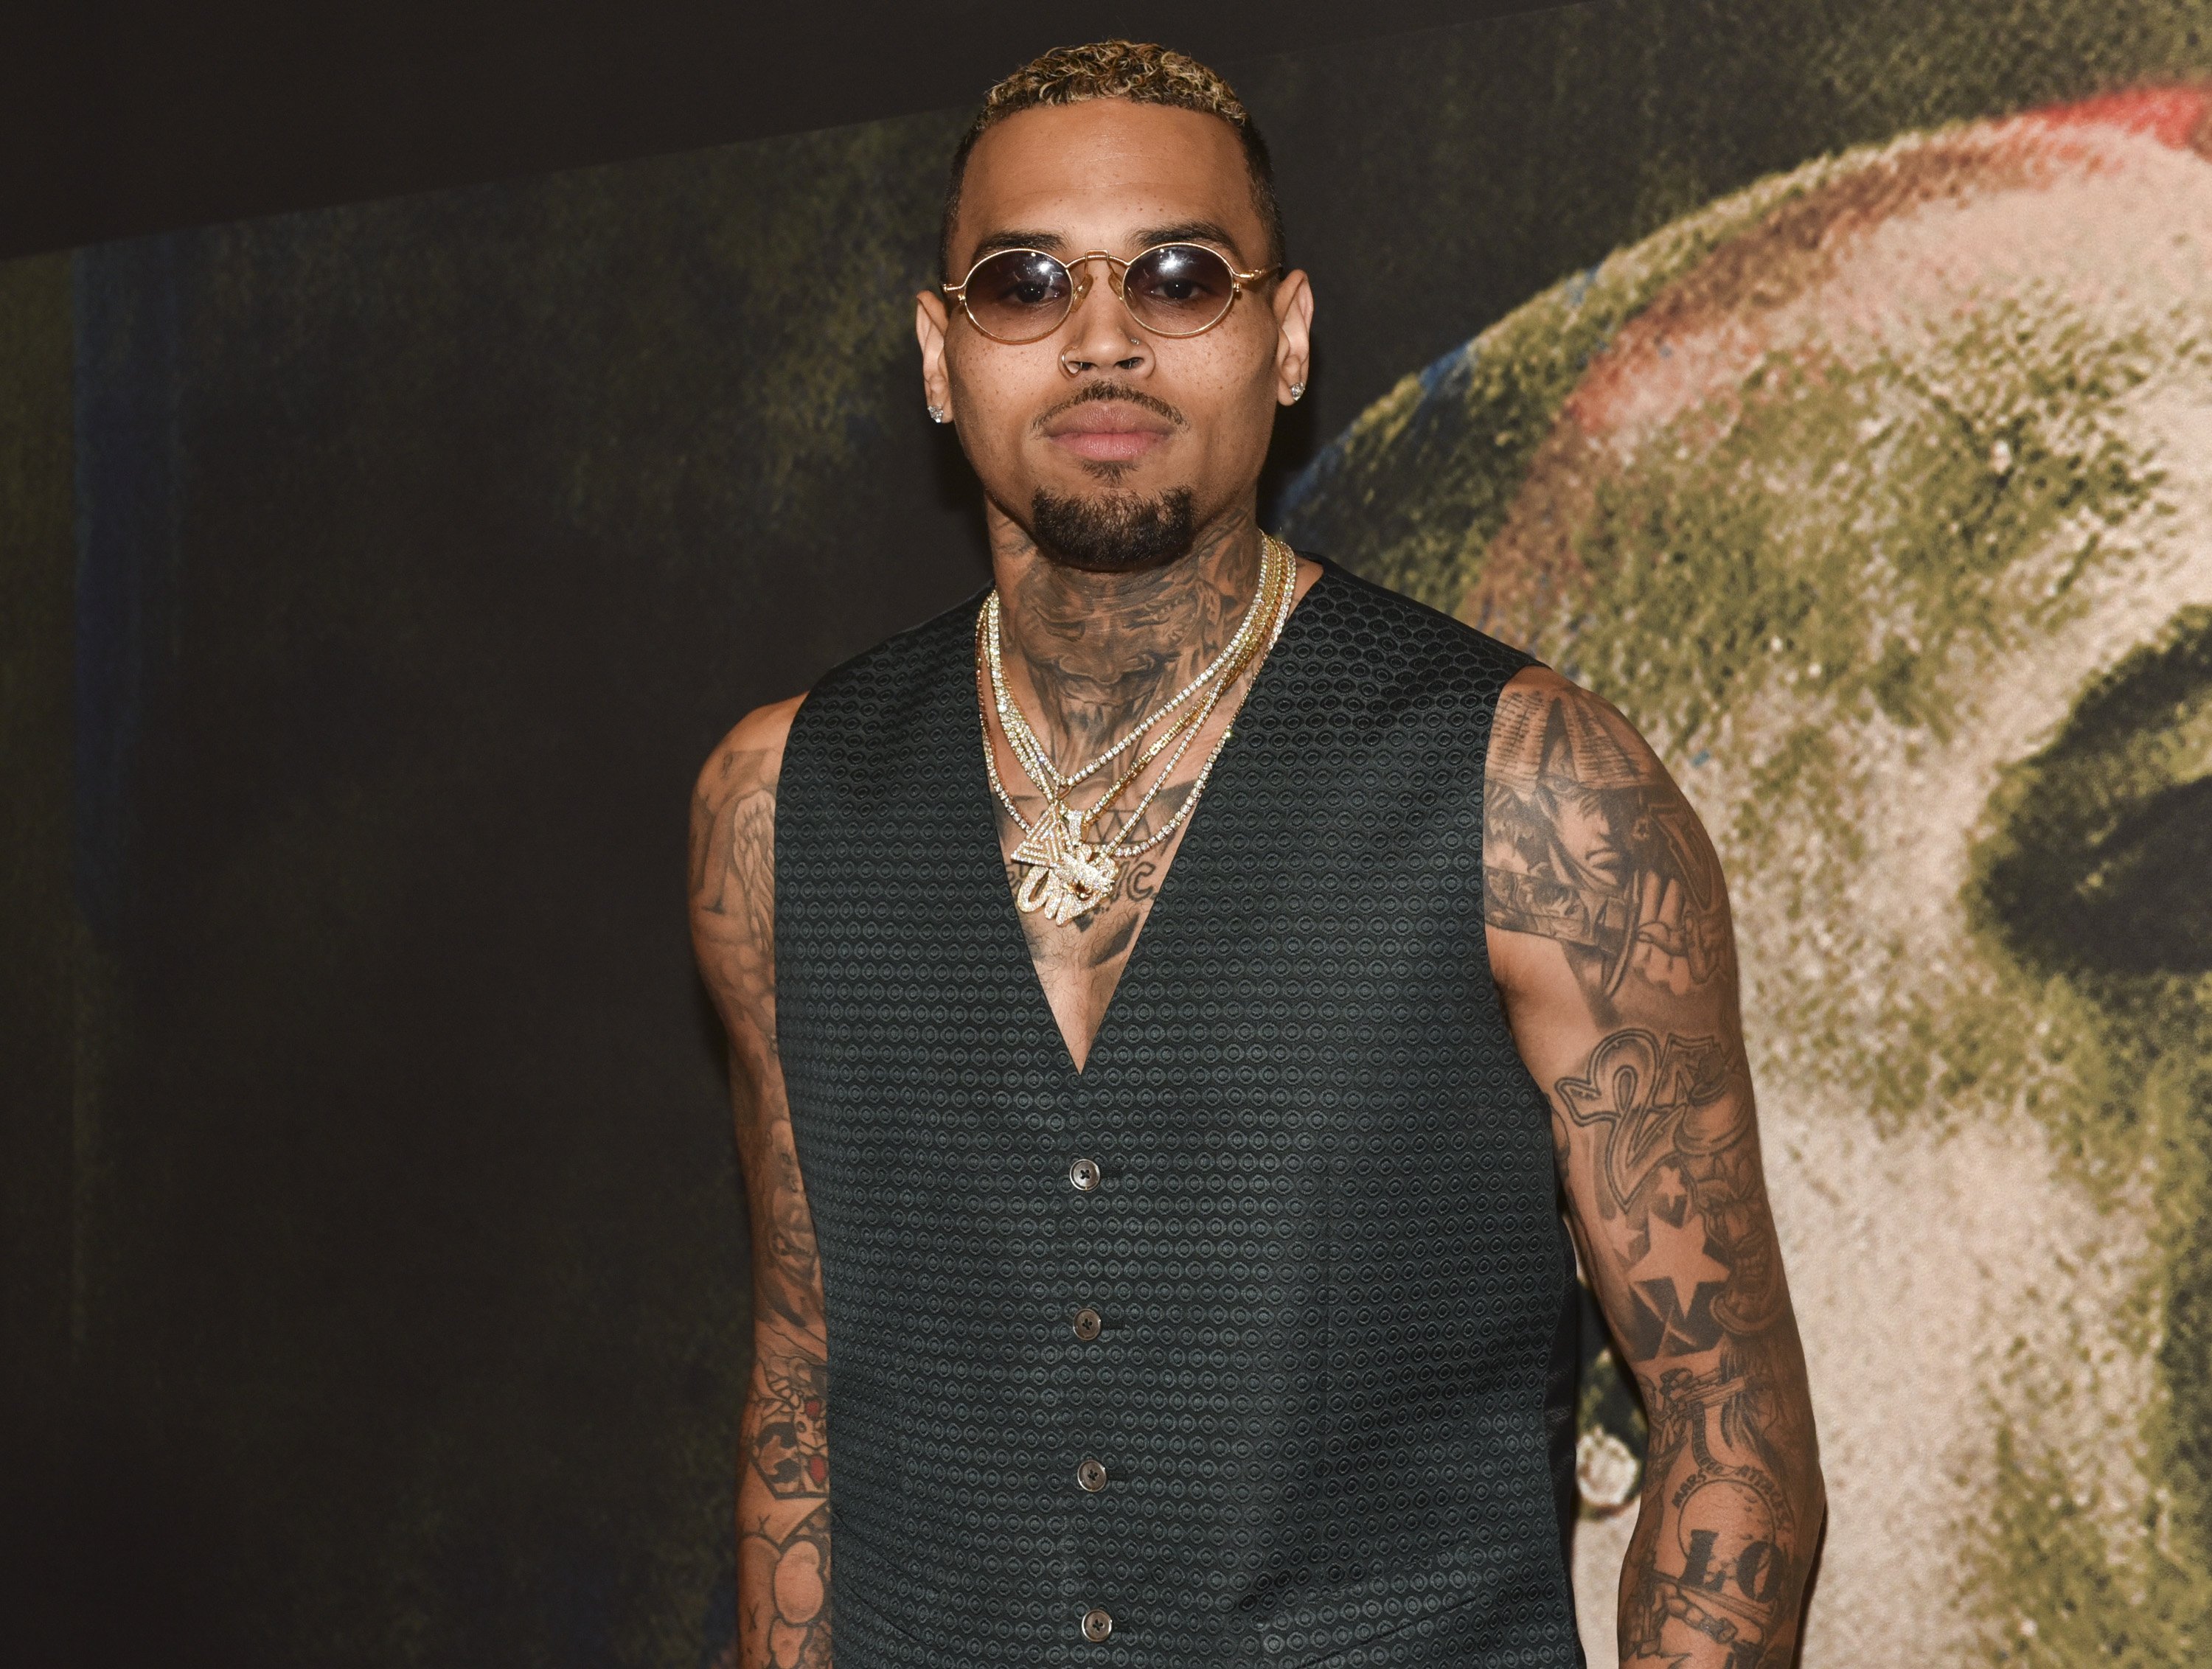 Chris Brown attending the premiere of "Chris Brown: Welcome to My Life" on June 6, 2017 in Los Angeles, California. | Source: Rodin Eckenroth/Getty Images